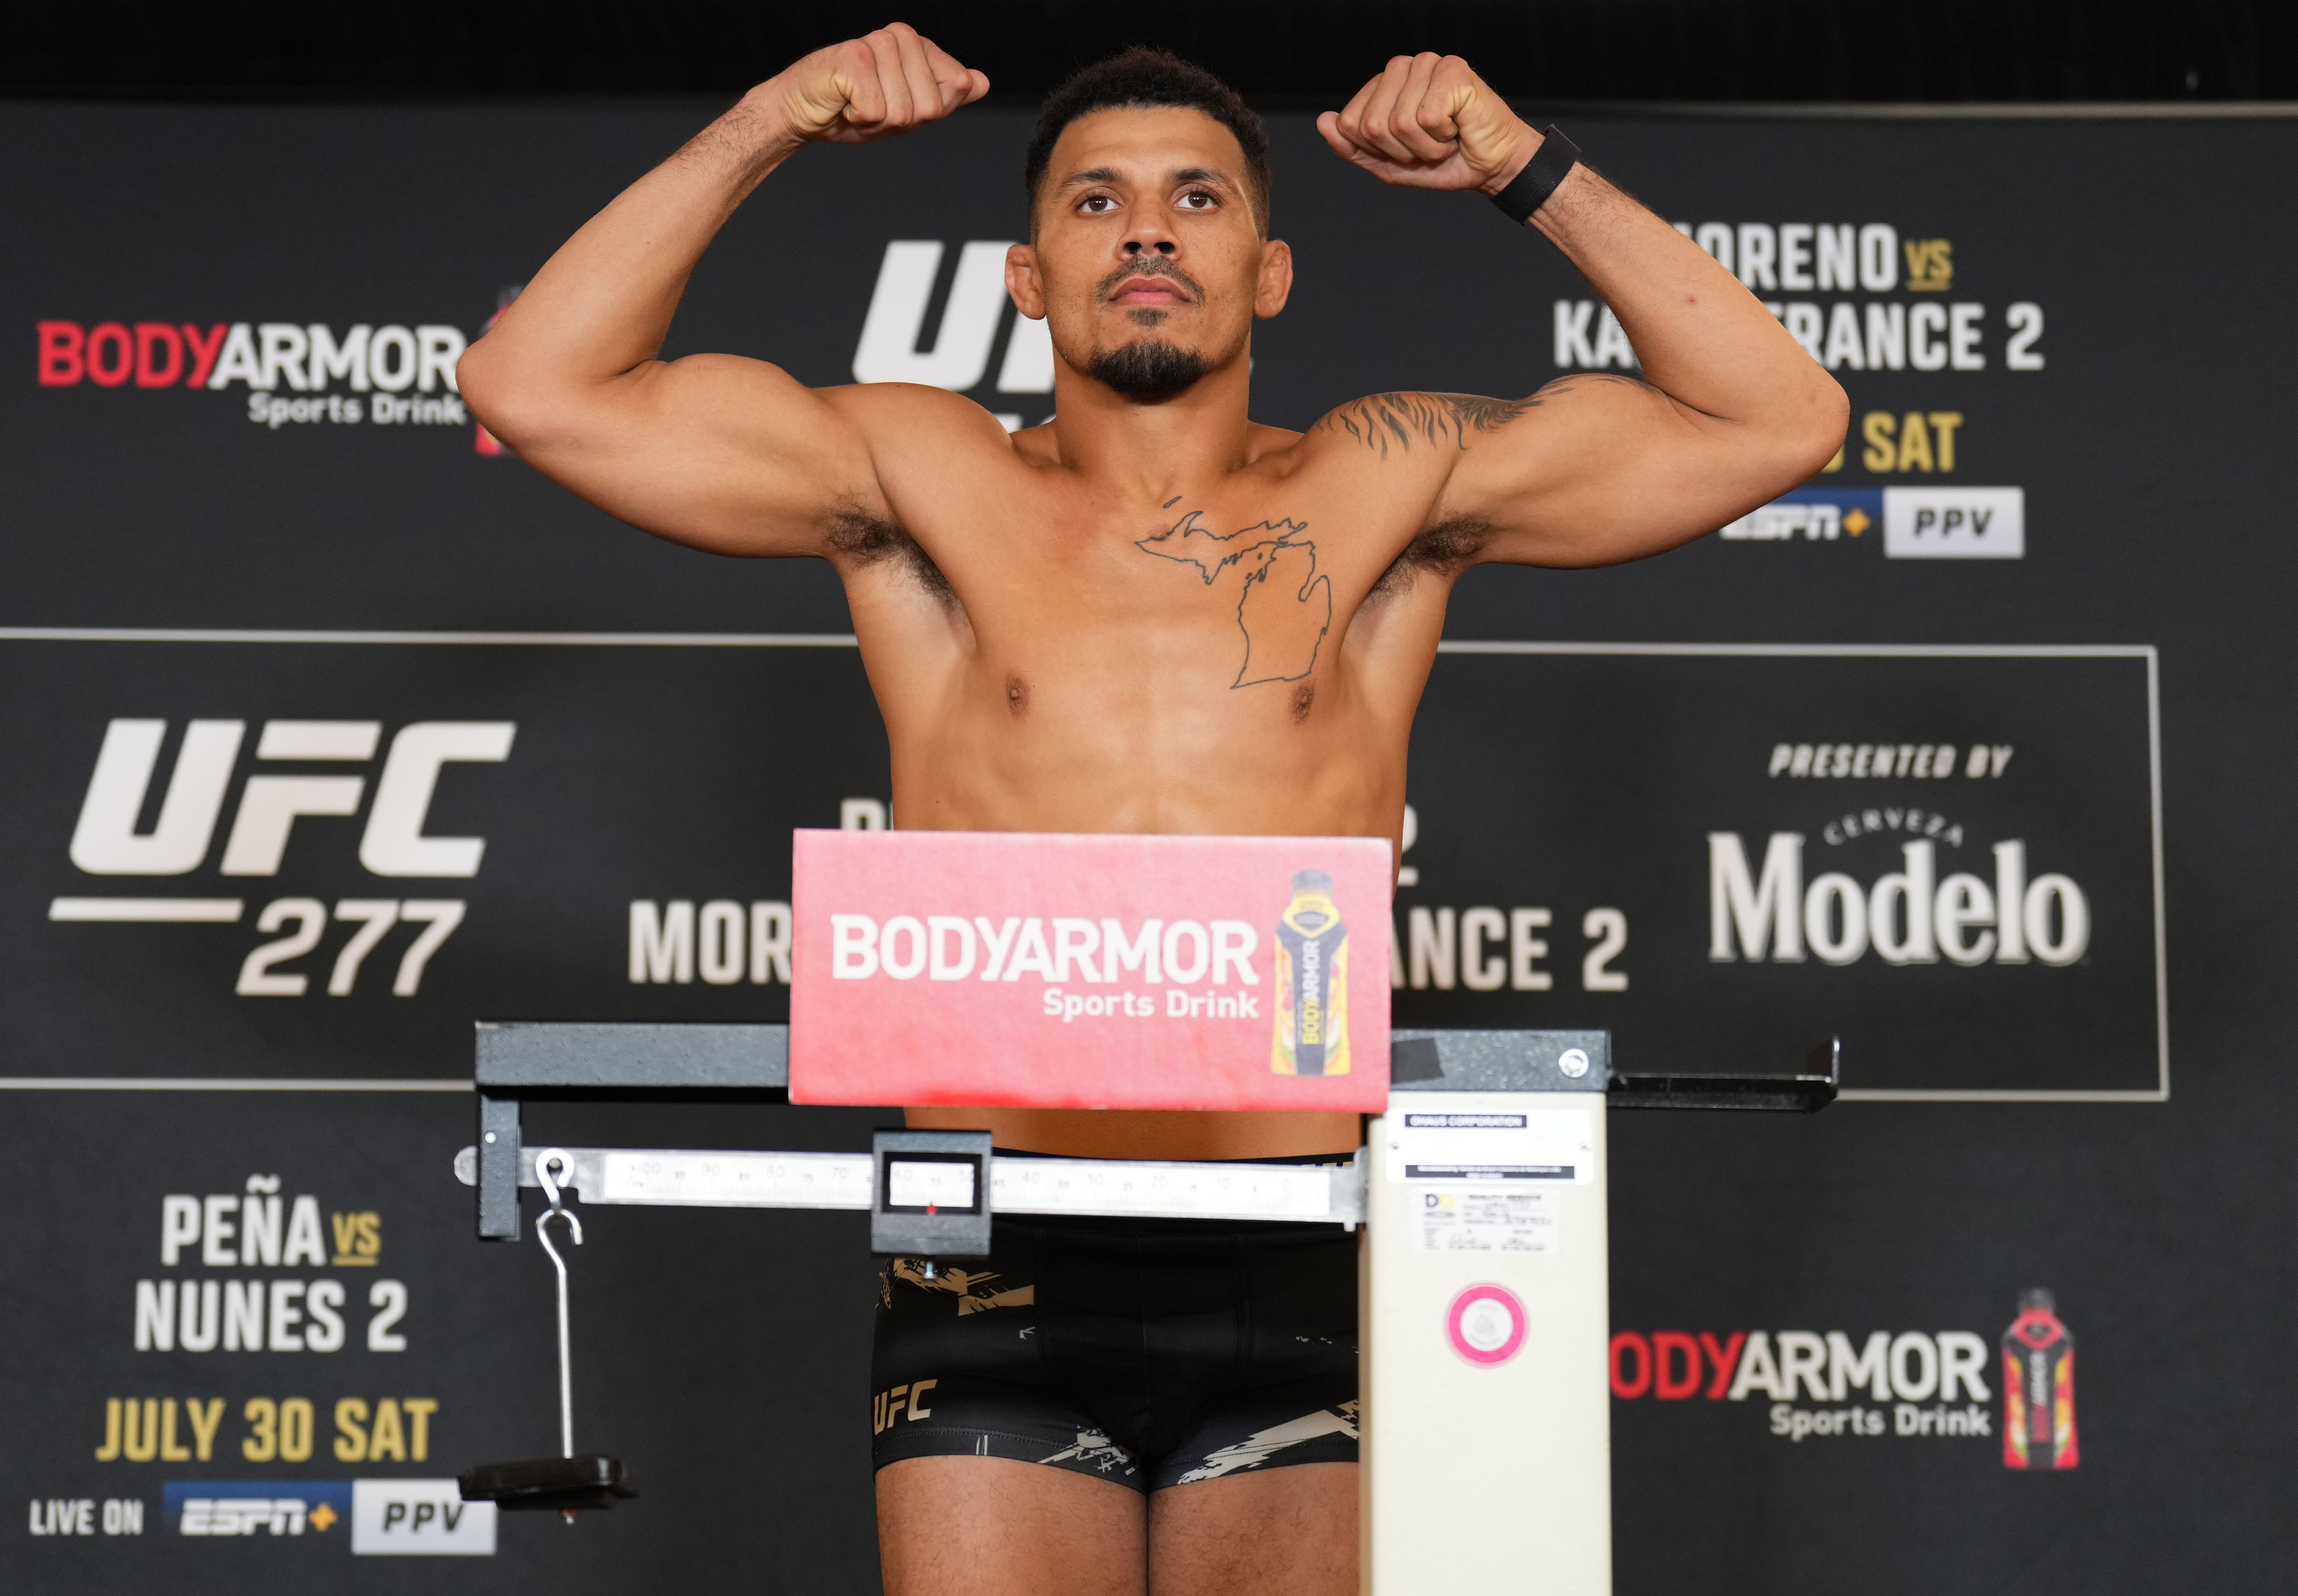 Drakkar Klose poses on the scale during the UFC 277 official weigh-in at the Hyatt Regency hotel